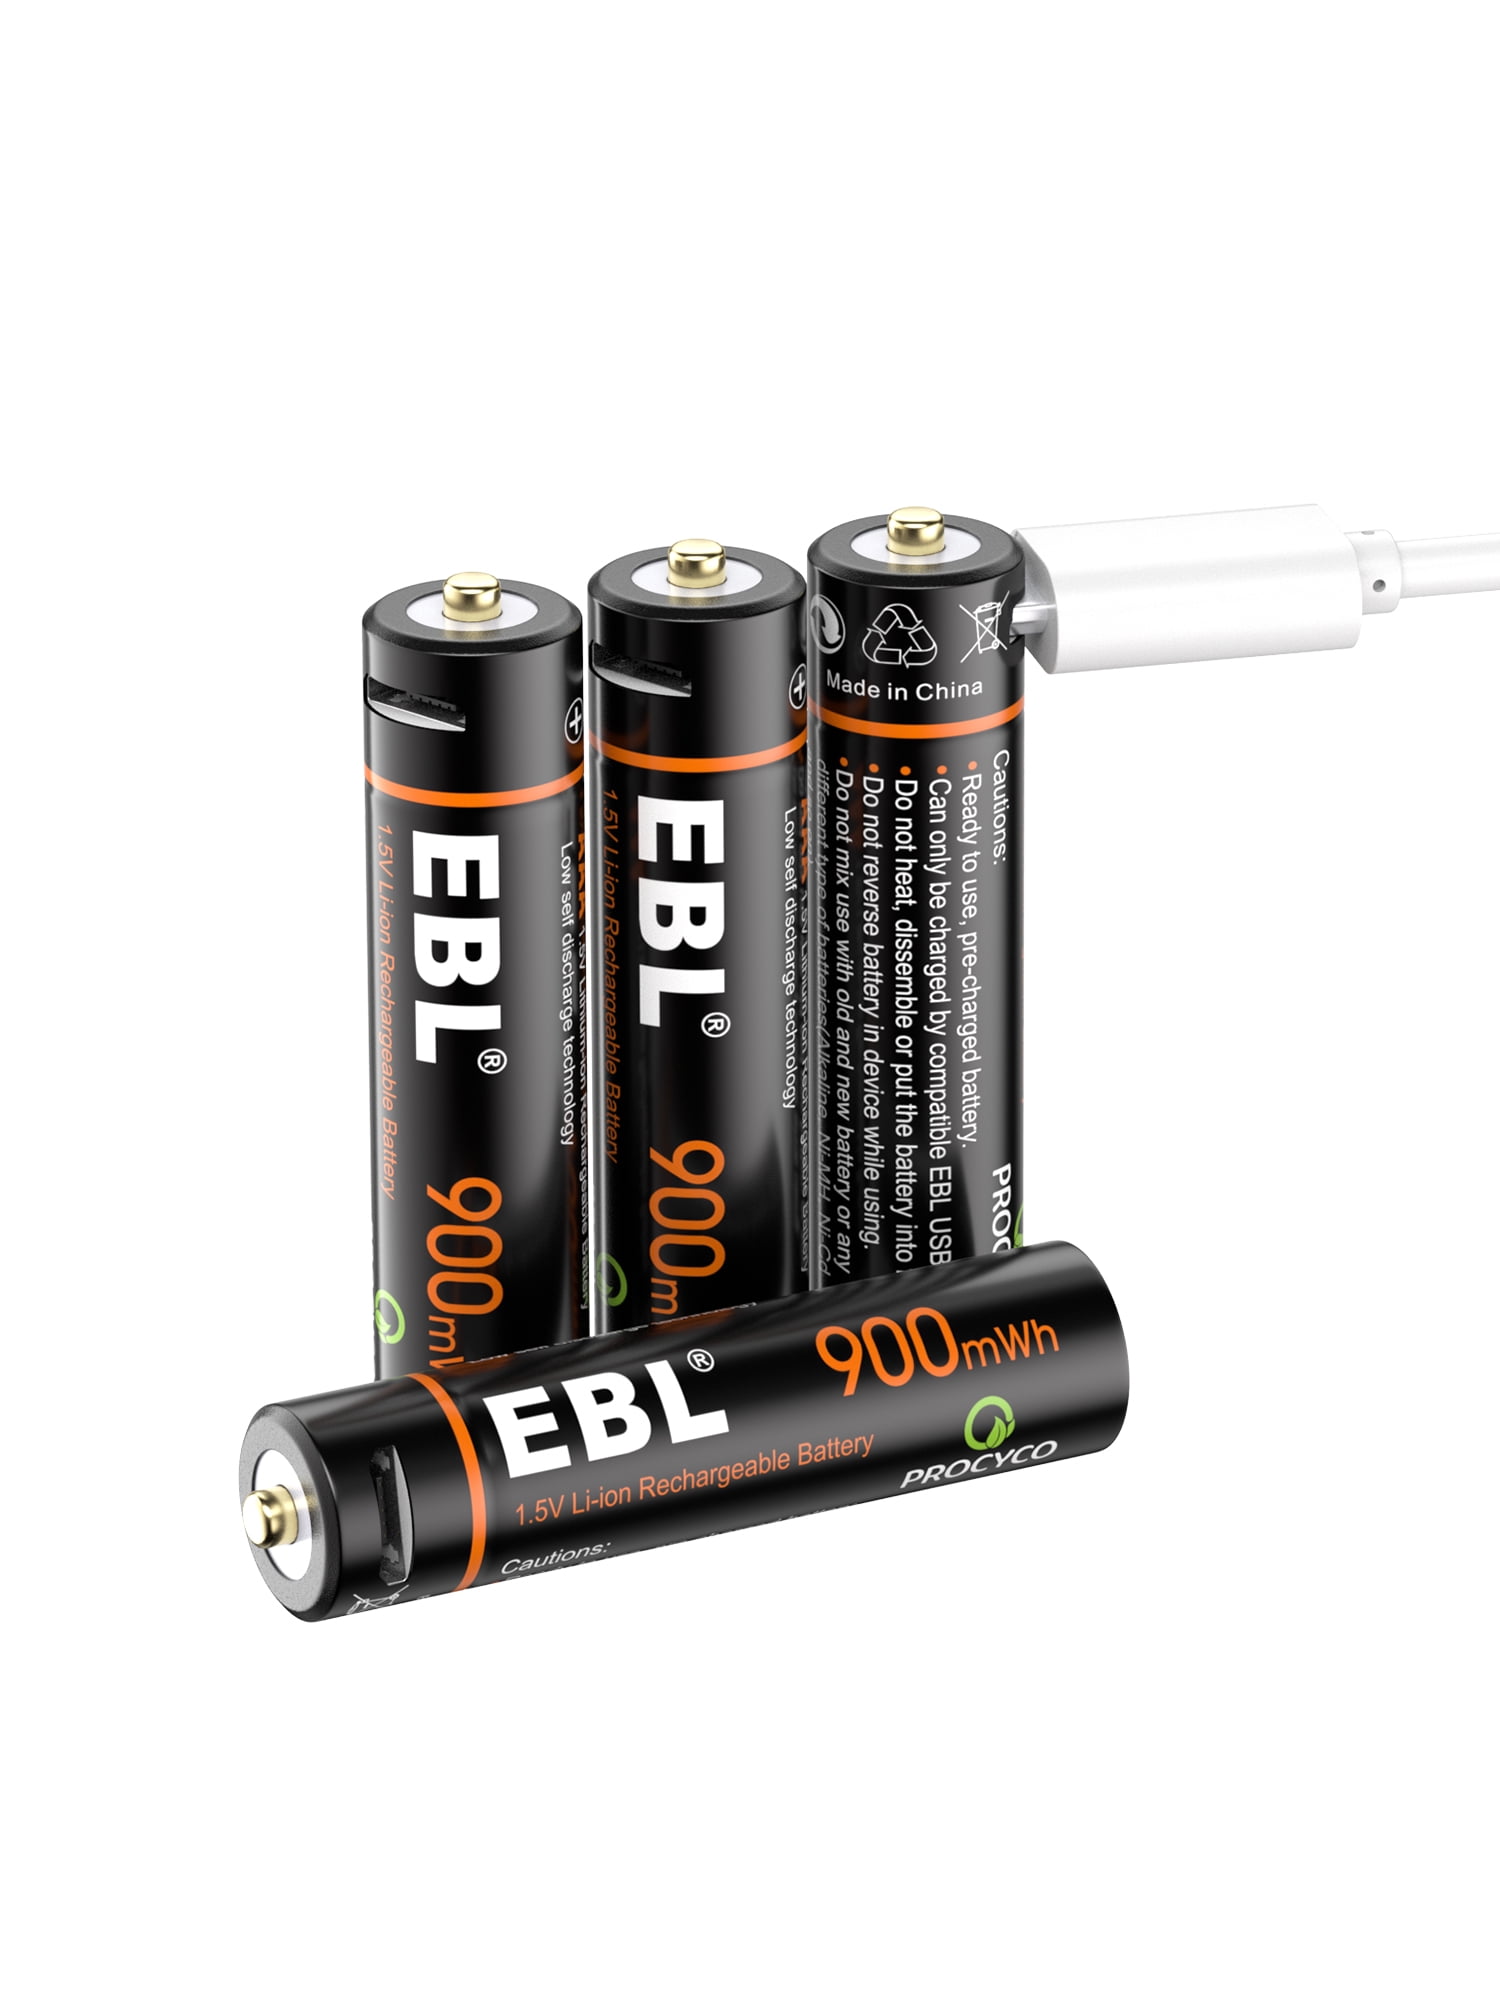  EBL Rechargeable AAA Lithium Batteries 1.5V AAA Battery 900mWh  USB Rechargeable Batteries - 4 Pack : Health & Household